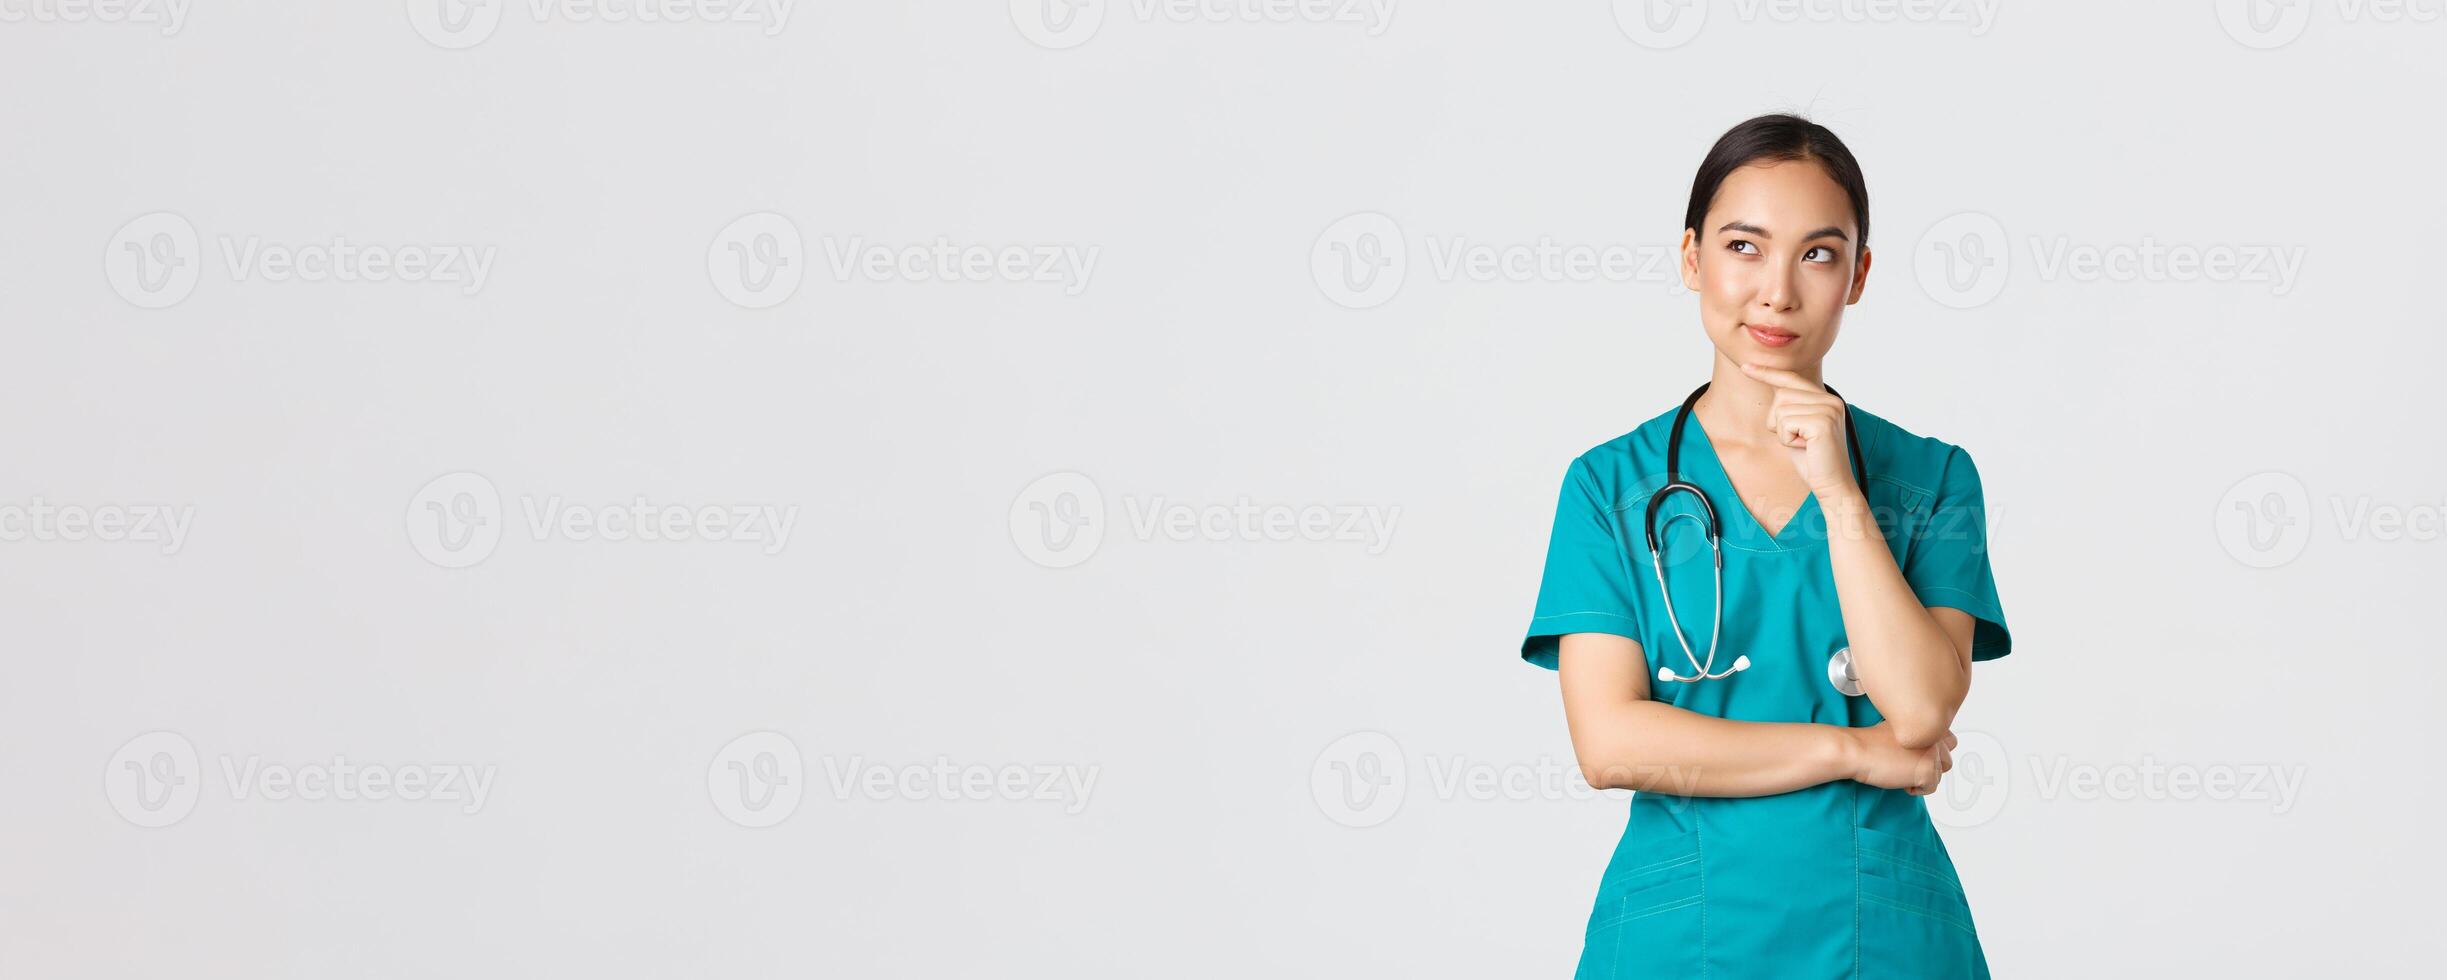 Covid-19, healthcare workers, pandemic concept. Thoughtful smart asian nurse in scrubs looking away and thinking, smiling pleased. Doctor have interesting idea, pondering over white background photo